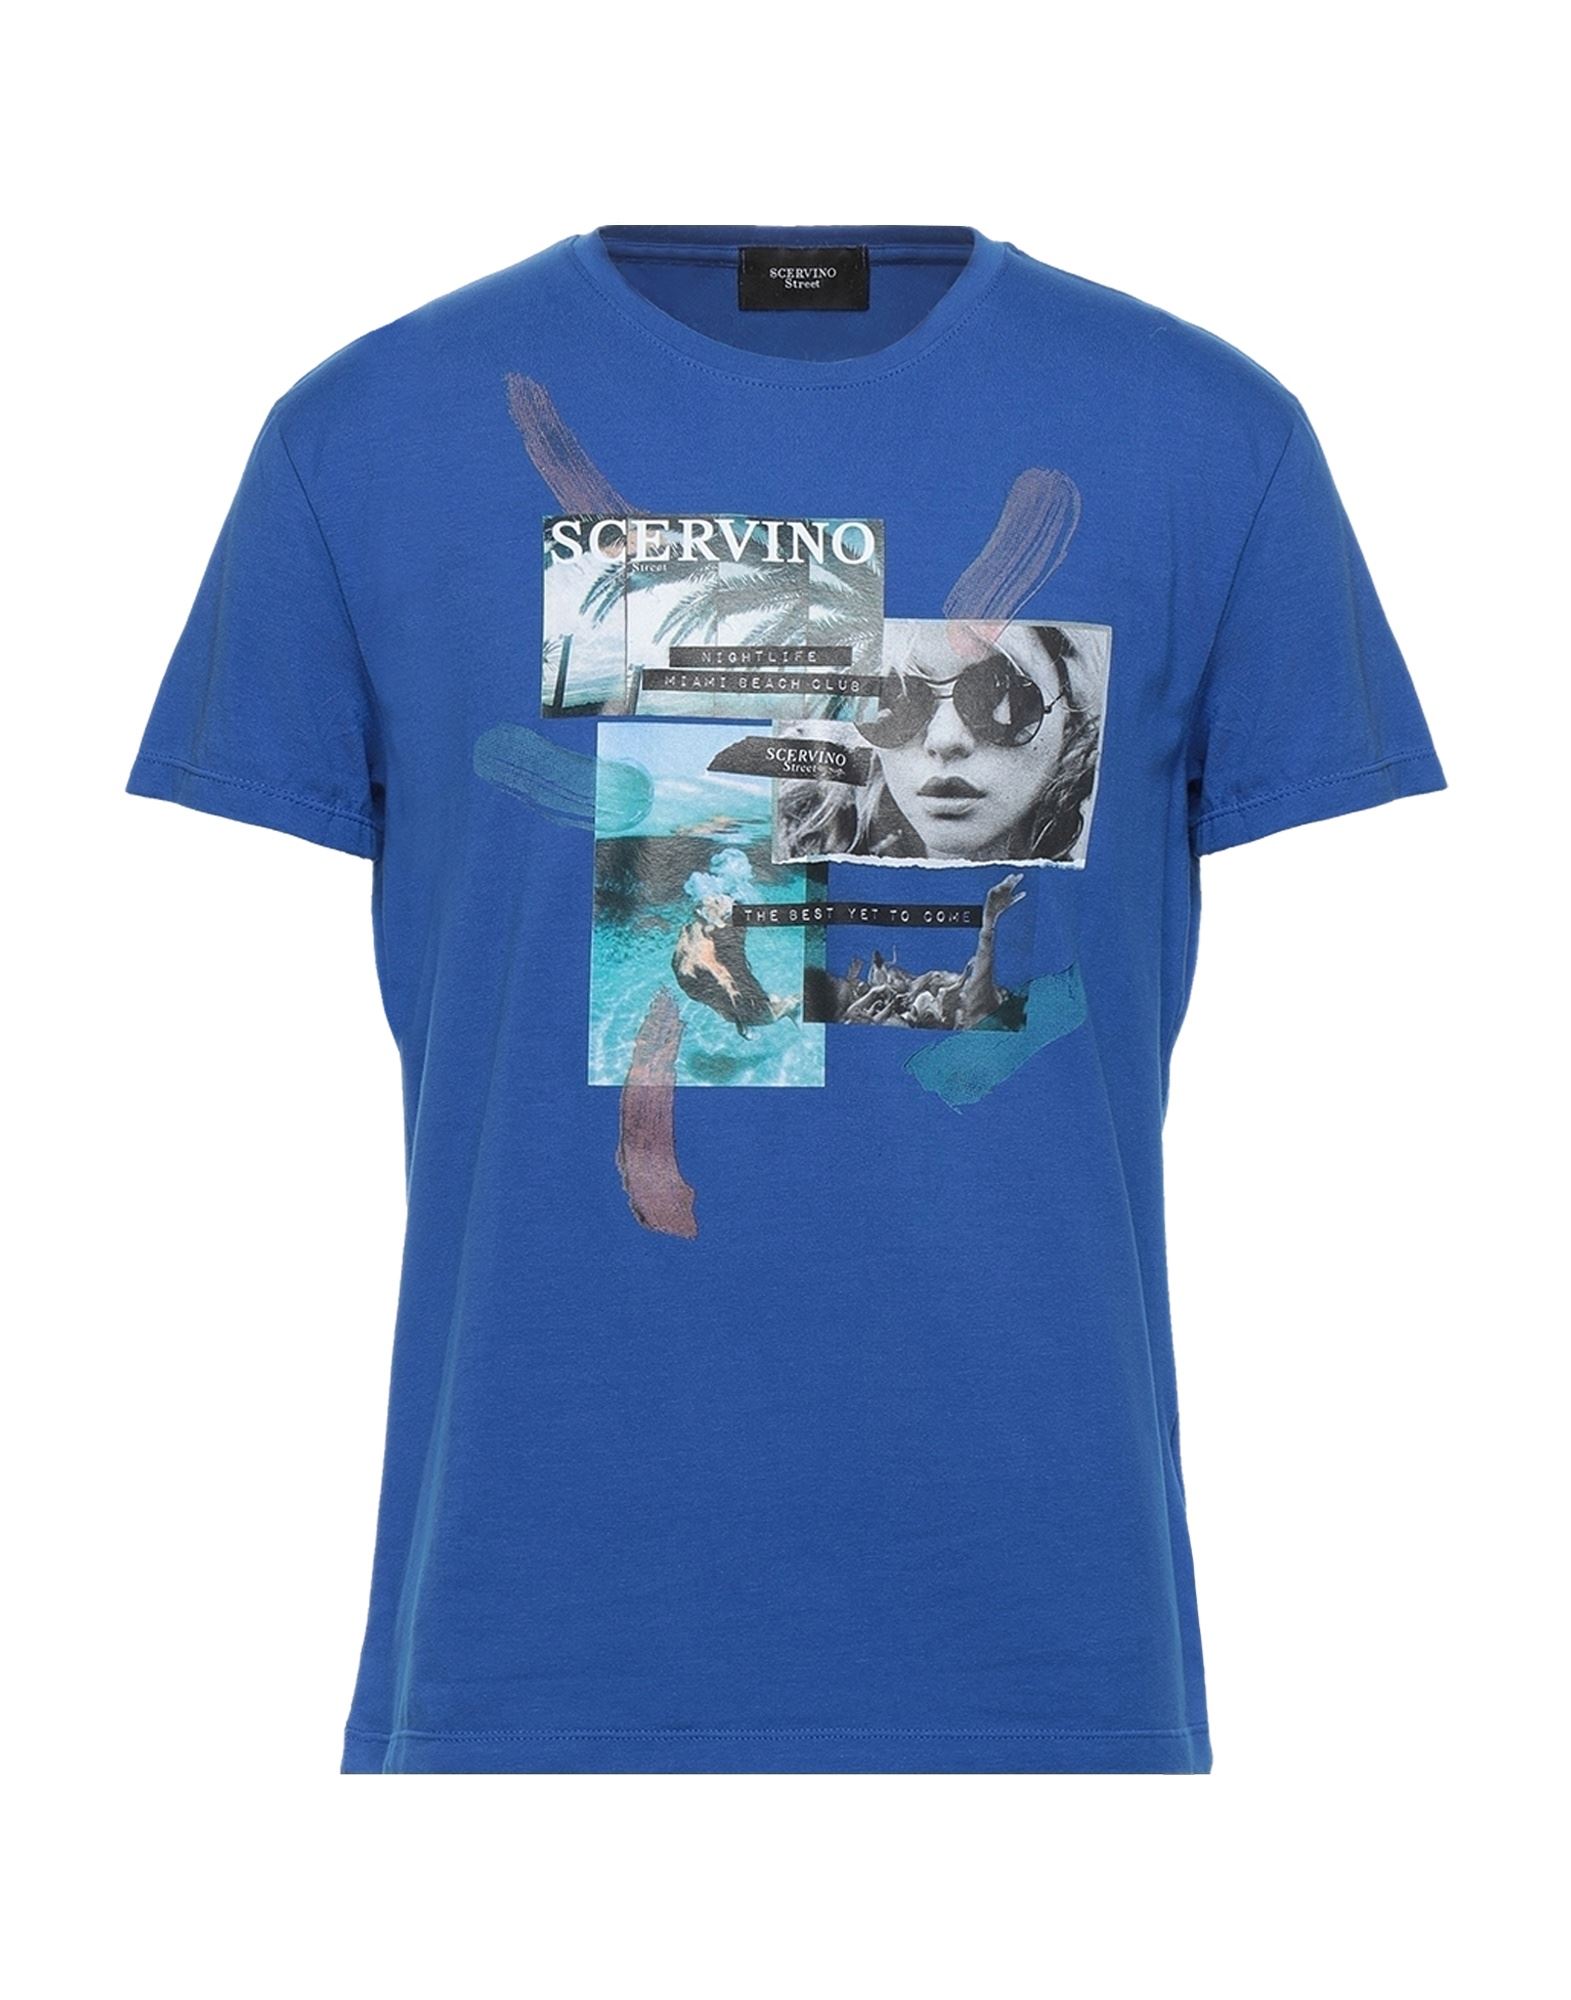 Scervino T-shirts In Bright Blue